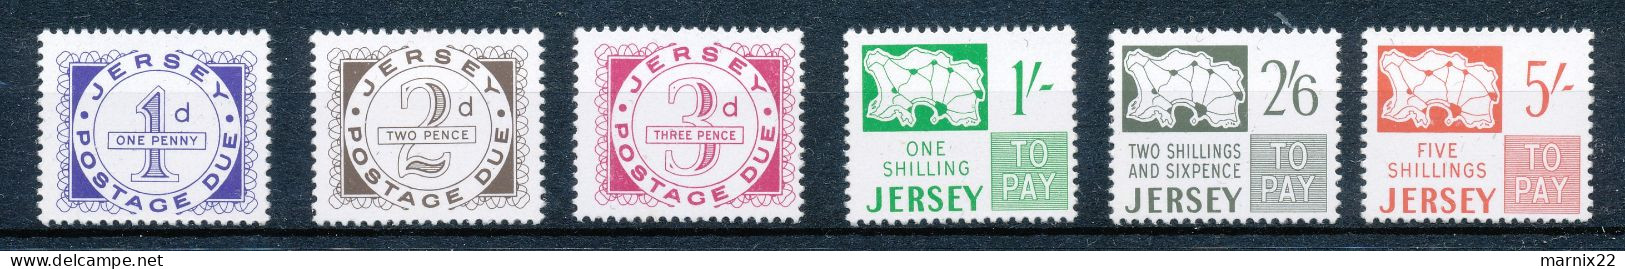 JERSEY 1969-1975 - POSTAGE DUE STAMPS 1 - 20 MNH - 2 COMPLETE SETS INCL. NEW VALUES - Jersey